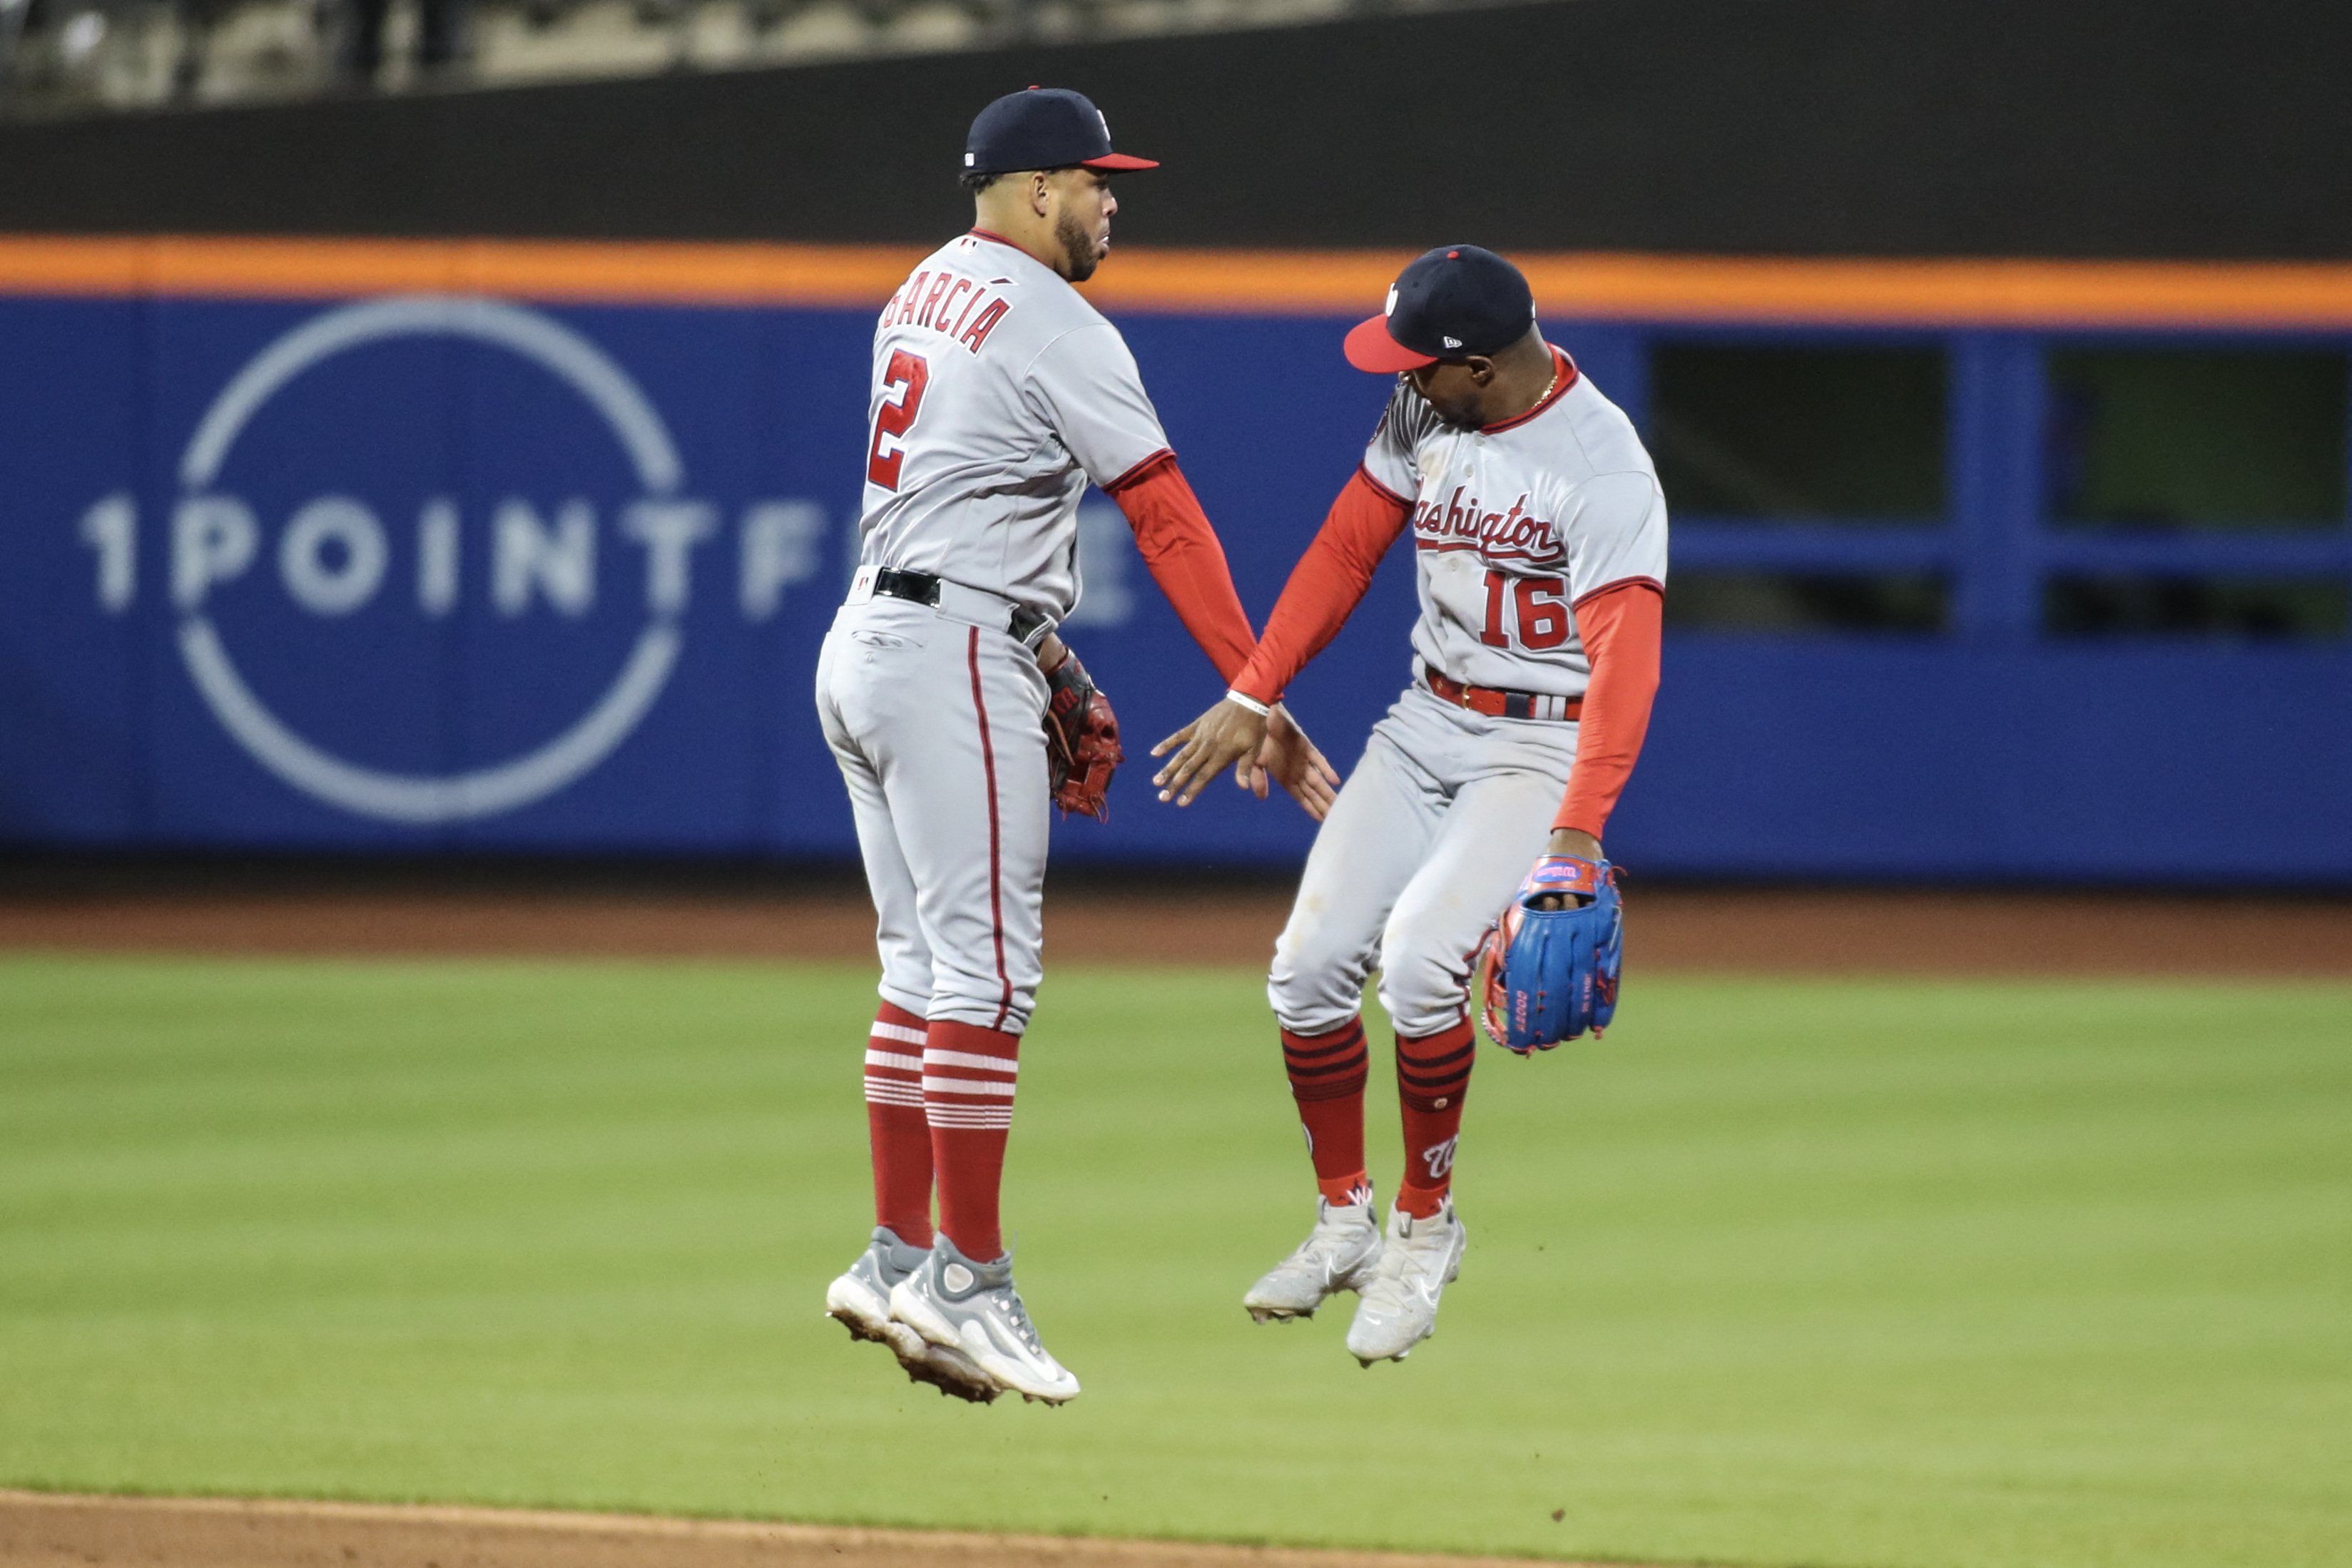 Mets give up lead, then rally past Nats to halt skid